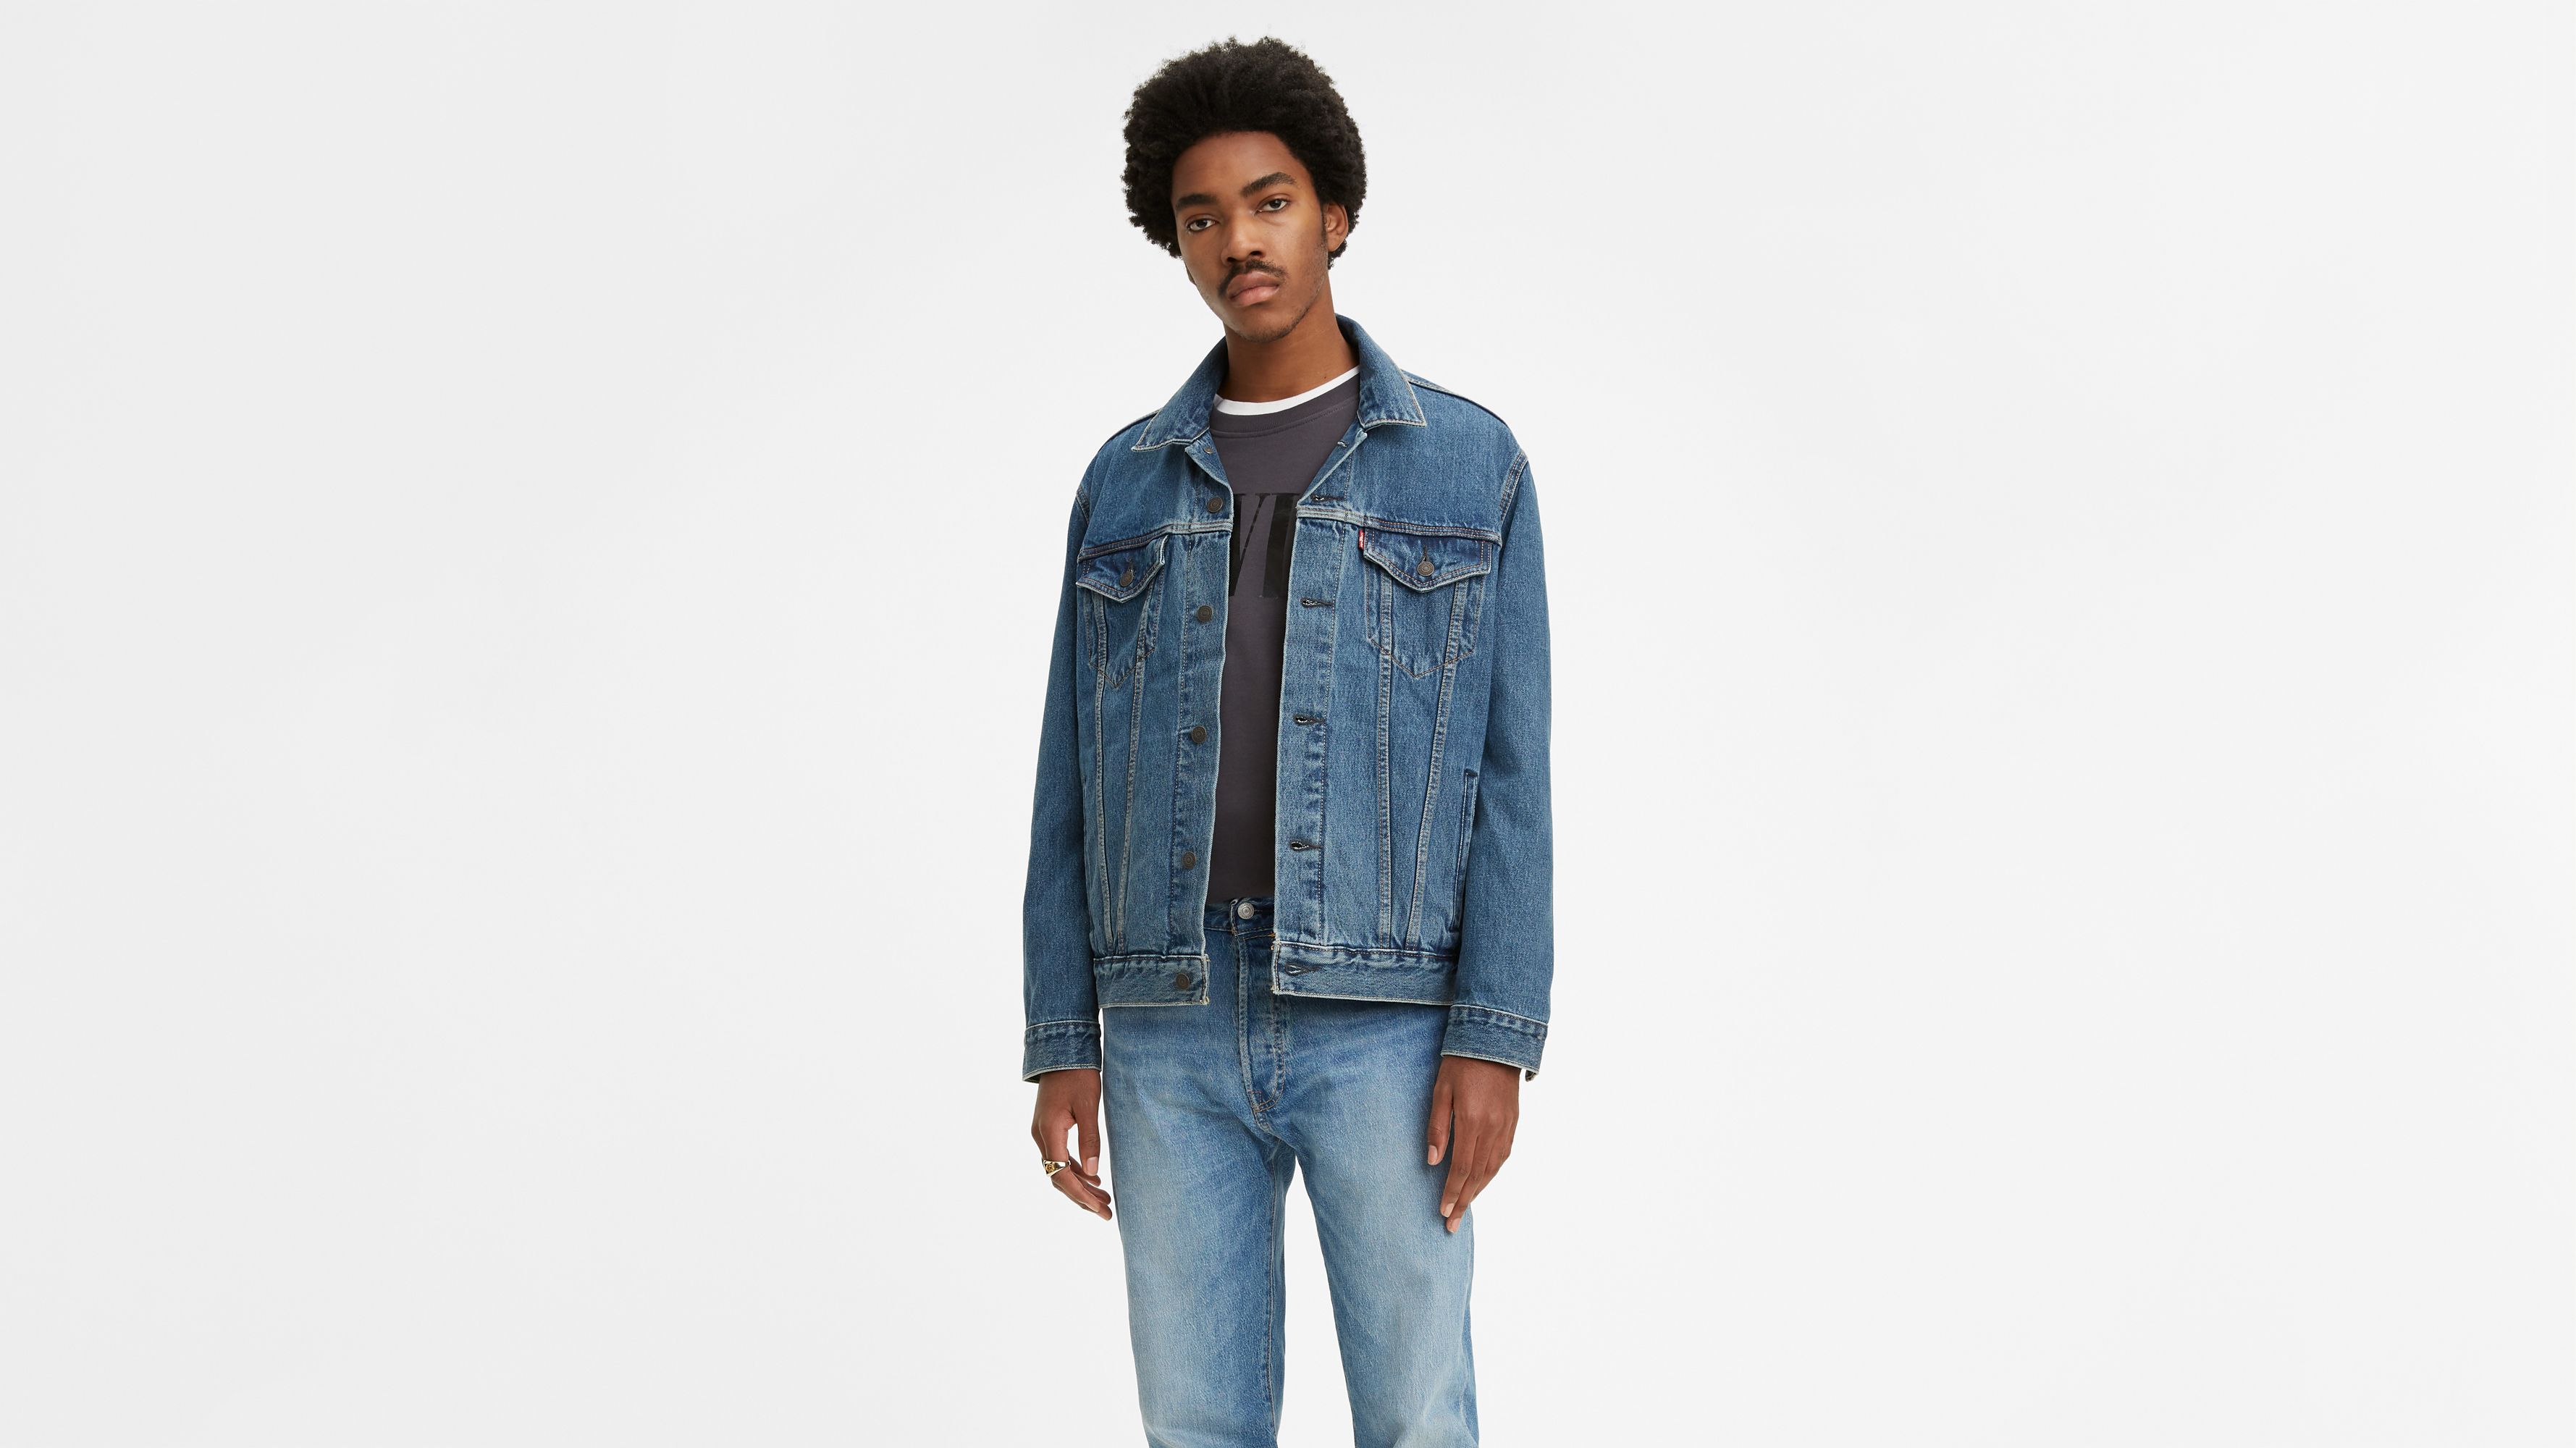 Update more than 105 levis jean jacket with fur